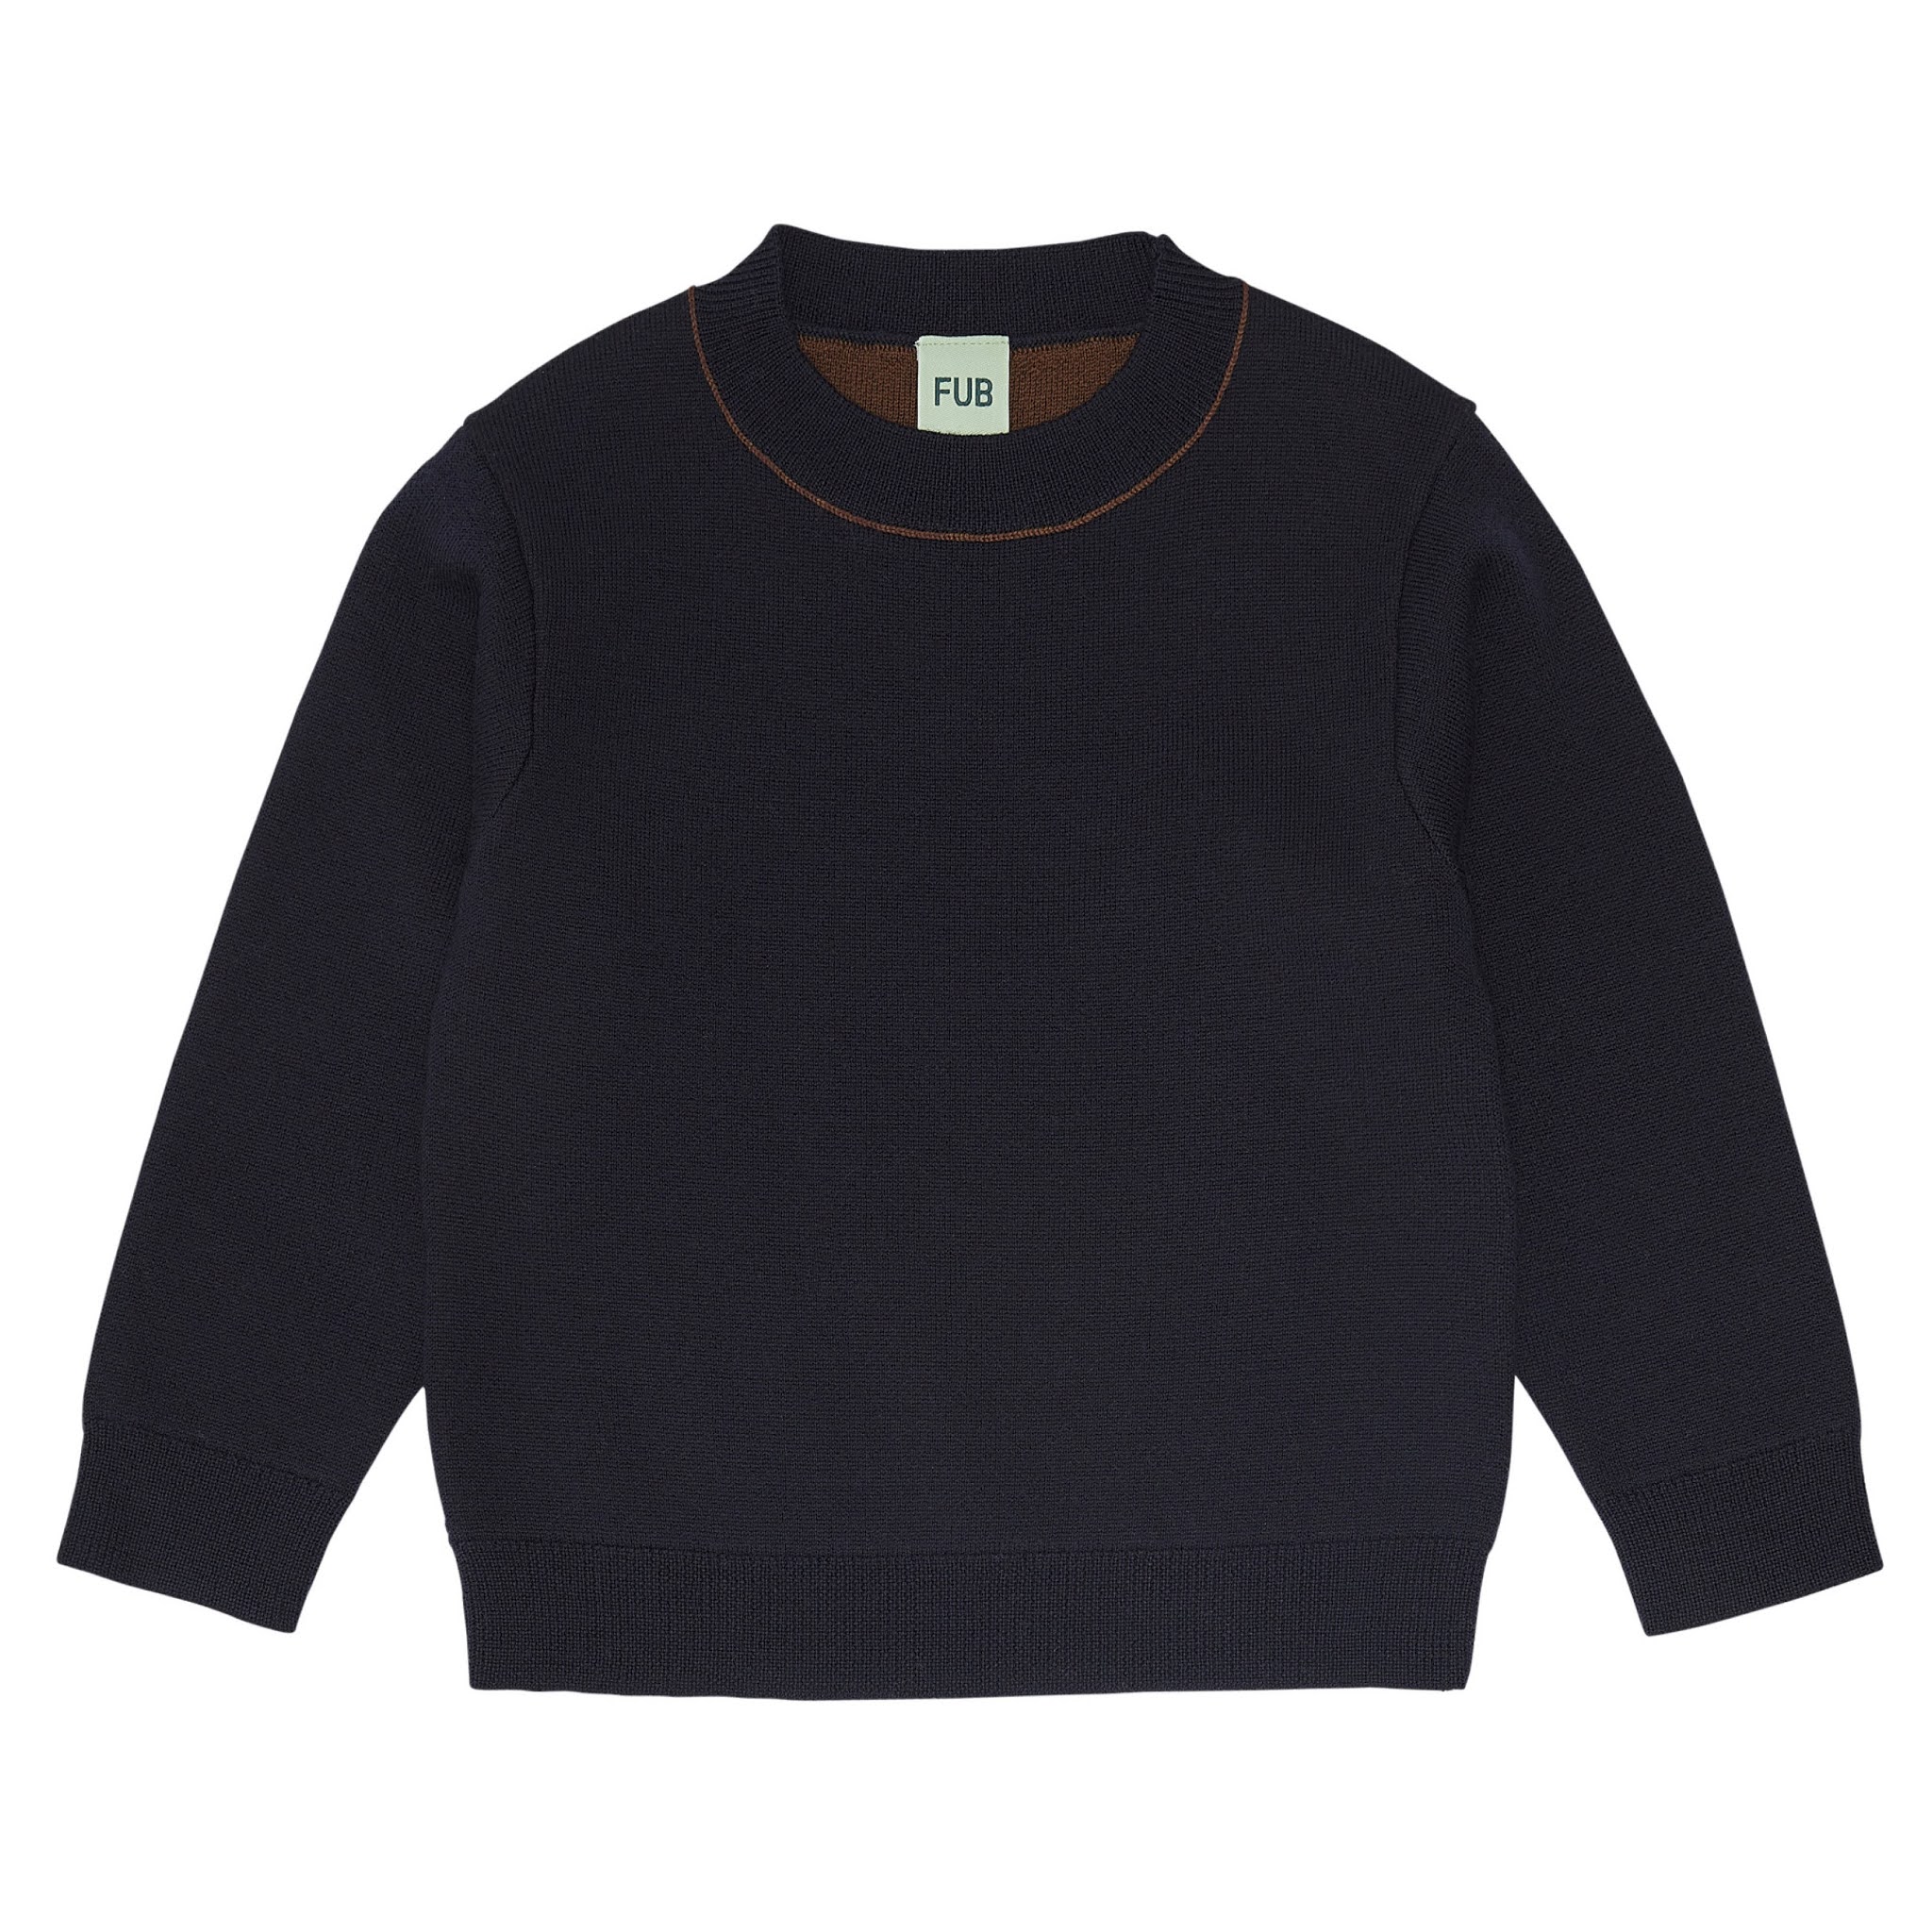 Boys Navy Blue Sweater from Fub